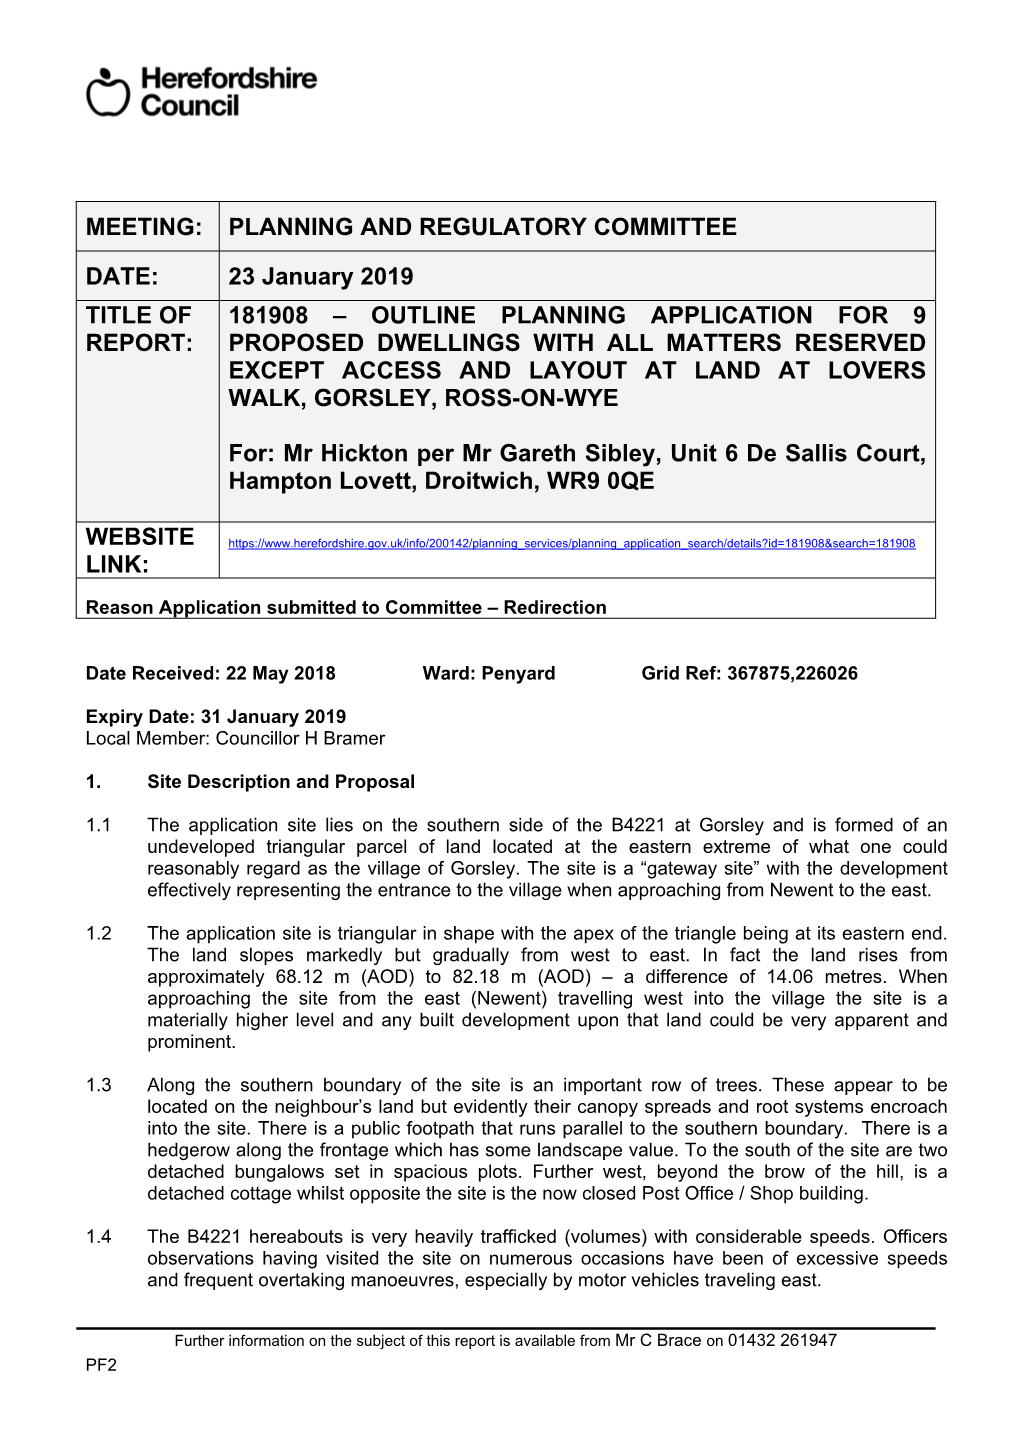 MEETING: PLANNING and REGULATORY COMMITTEE DATE: 23 January 2019 TITLE of REPORT: 181908 – OUTLINE PLANNING APPLICATION for 9